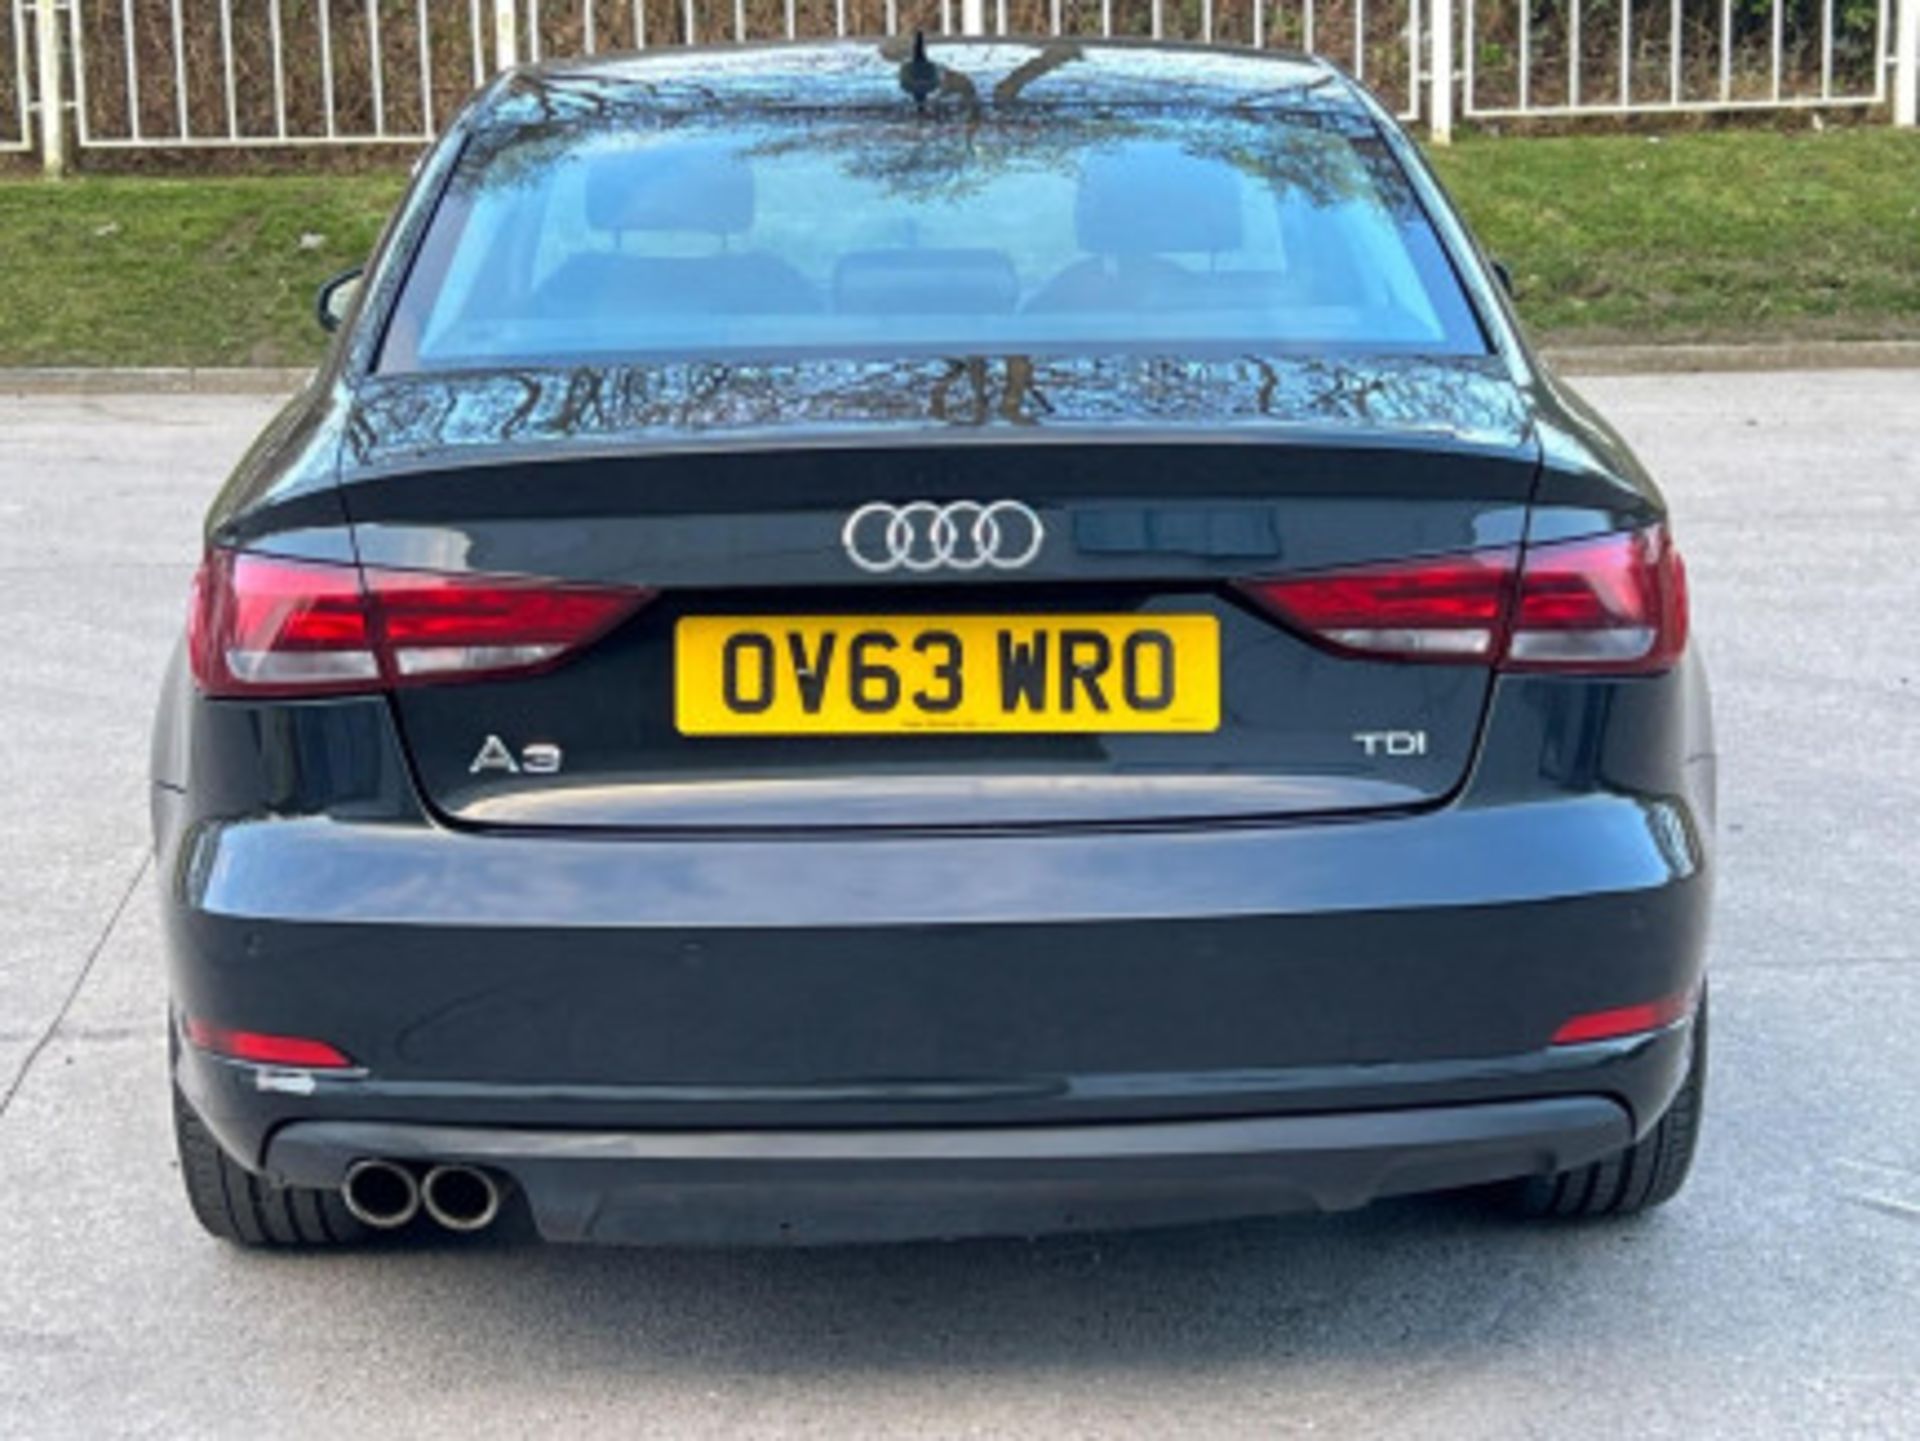 AUDI A3 2.0TDI SPORTBACK - STYLE, PERFORMANCE, AND COMFORT COMBINED >>--NO VAT ON HAMMER--<< - Image 59 of 216